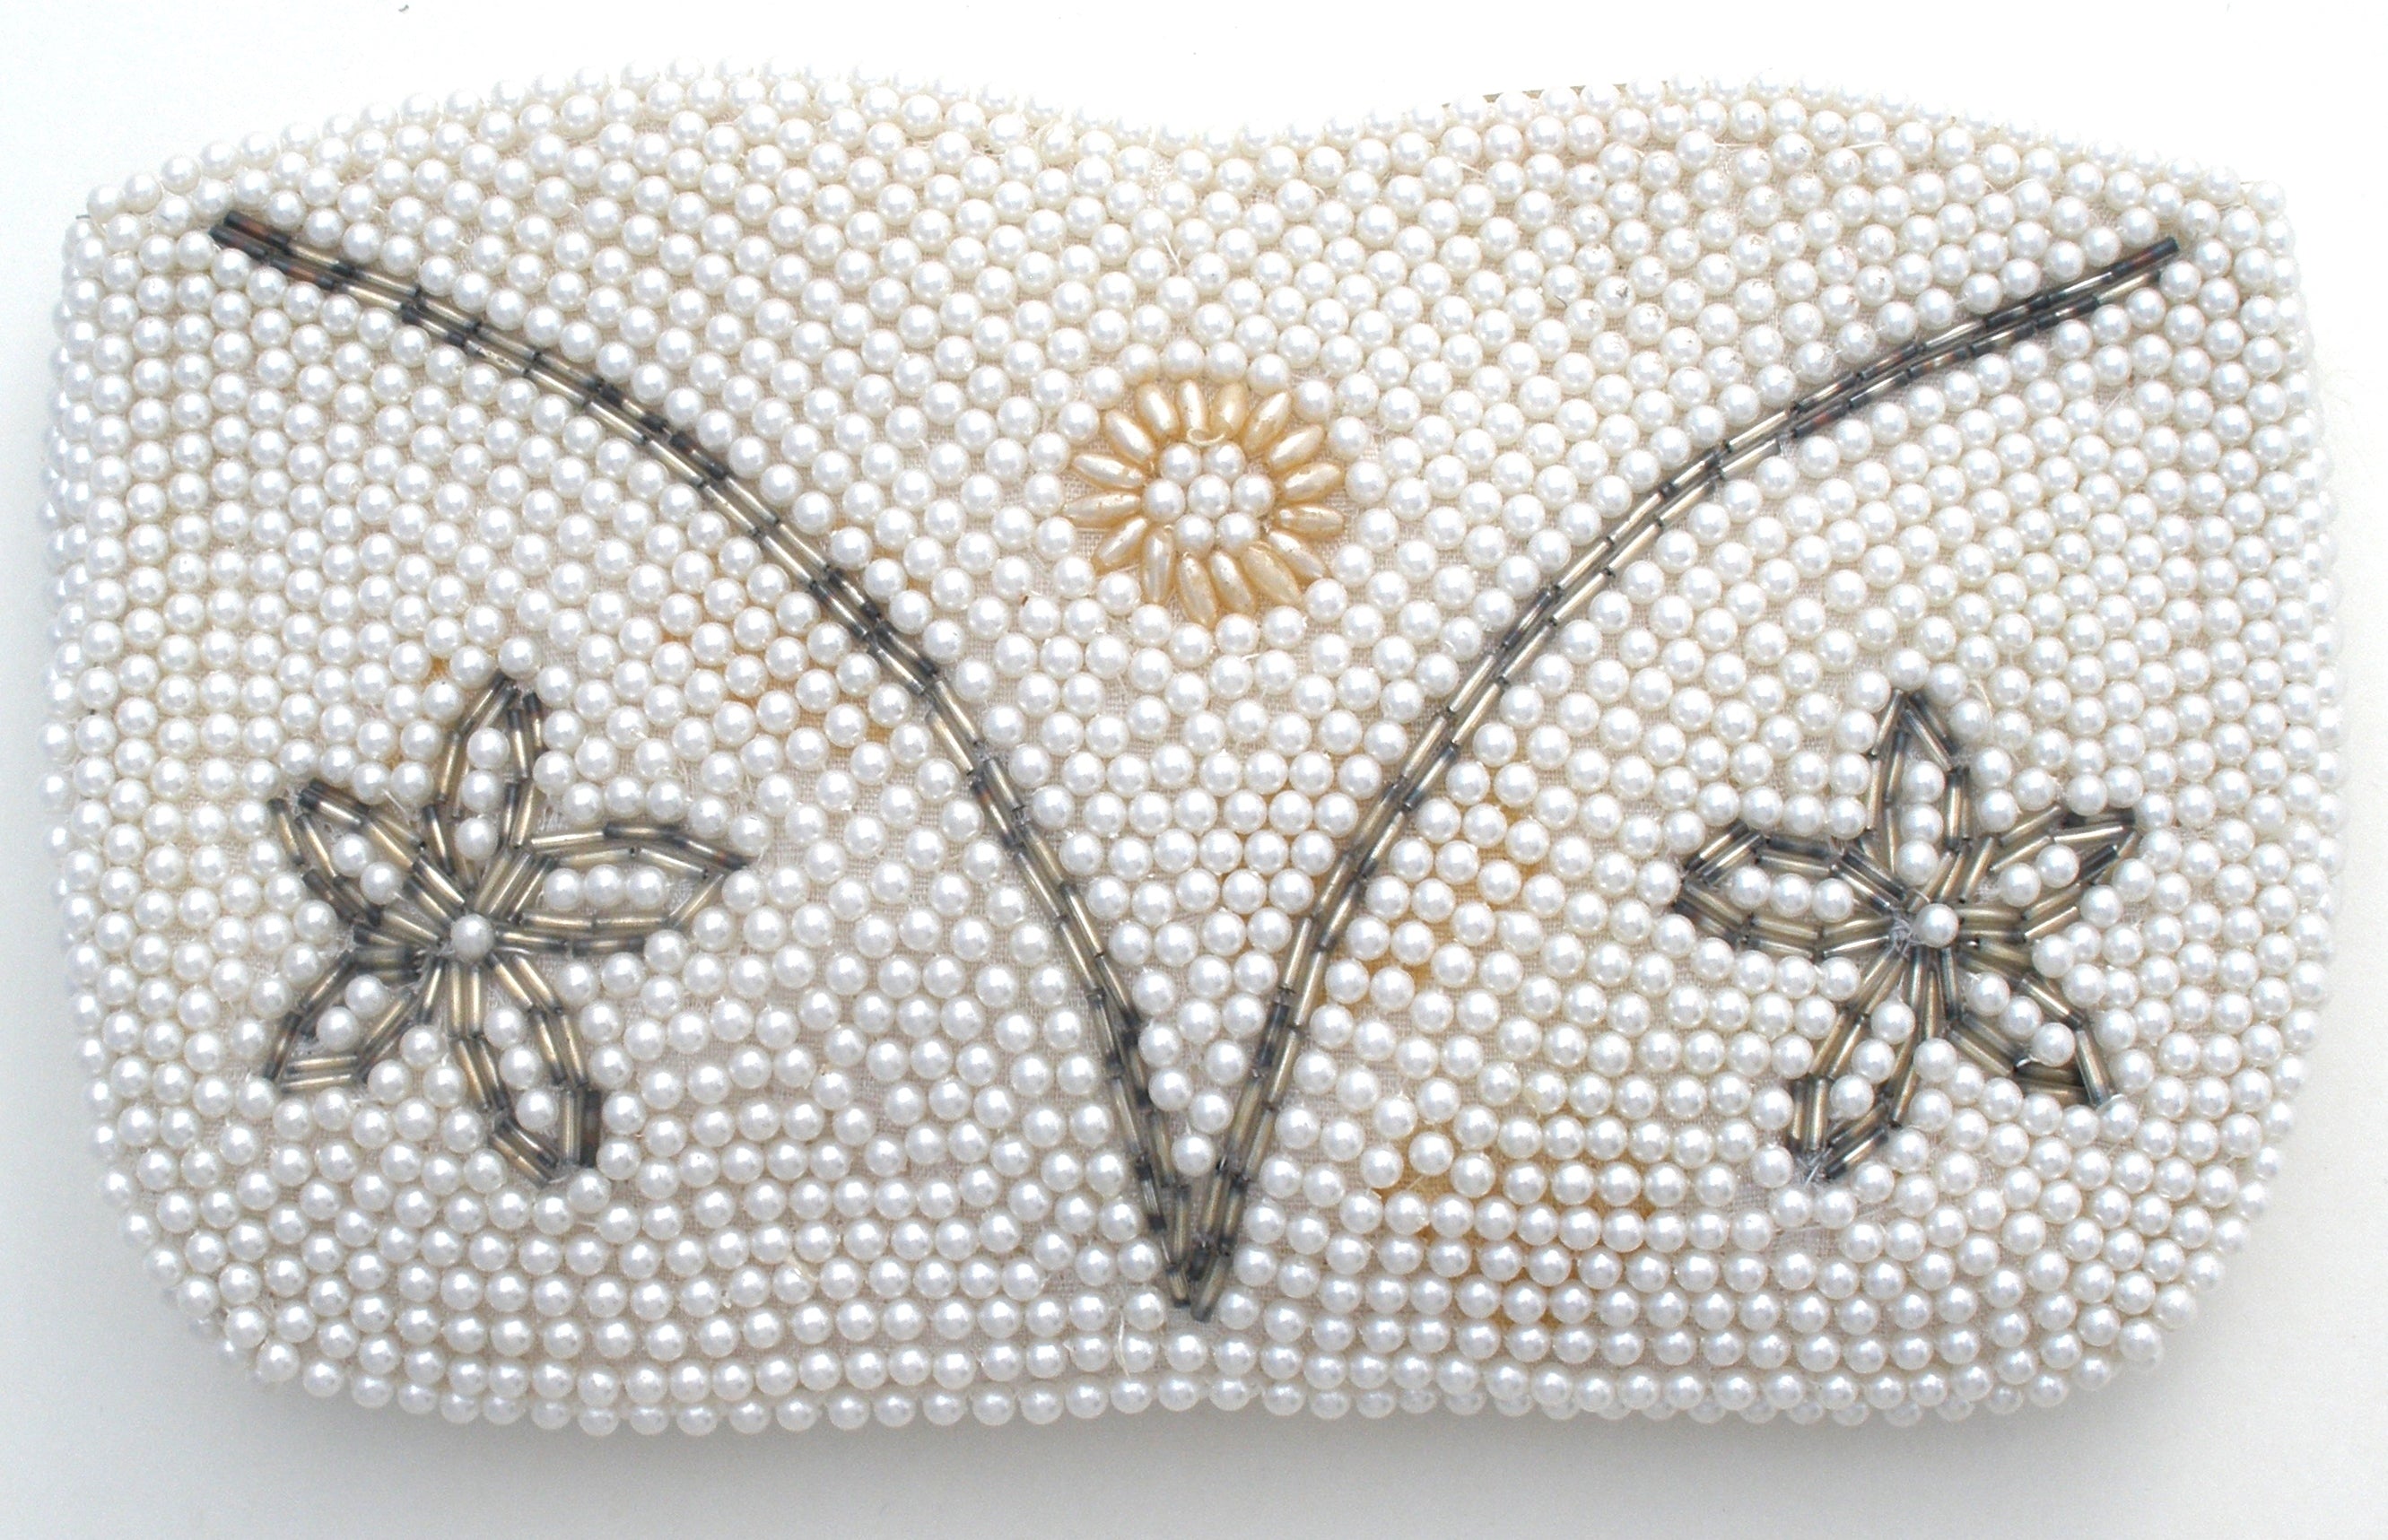 Kainiche by Mehak Mother Of Pearl Clutch Bag | Accessories, Handbags,  Clutches, Bags, Grey, Raw Silk, Embel… | Pearl clutch bag, Embellished clutch  bags, Clutch bag